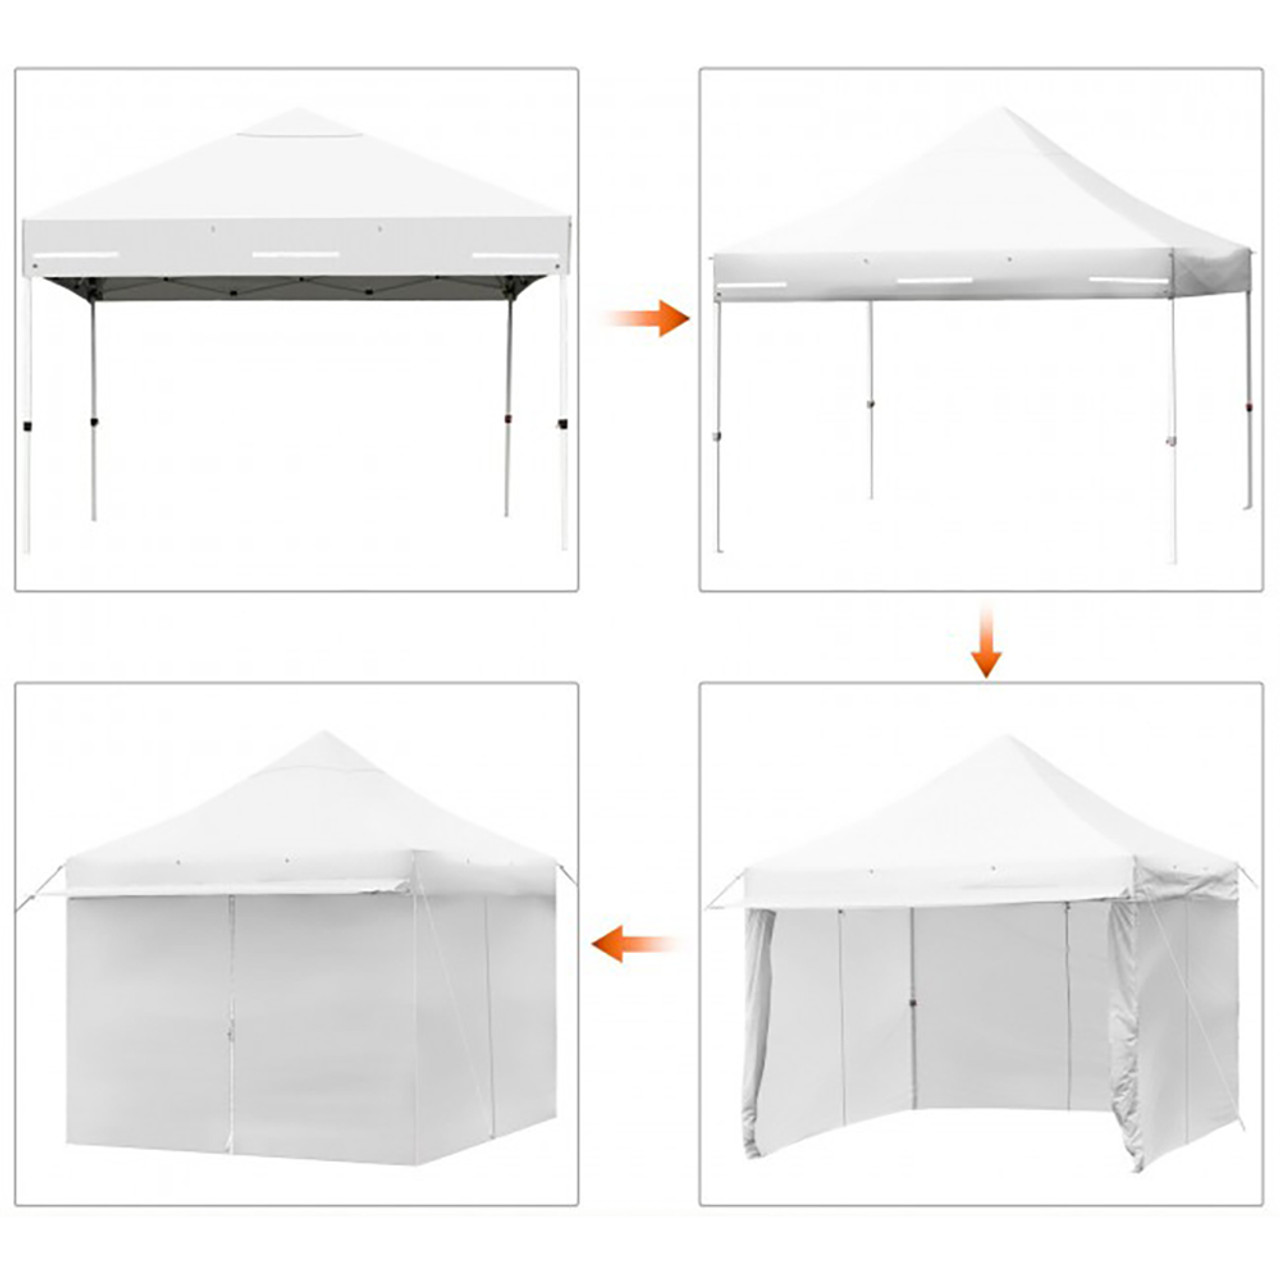 10' x 10' Height-Adjustable Folding Pop-up Canopy product image